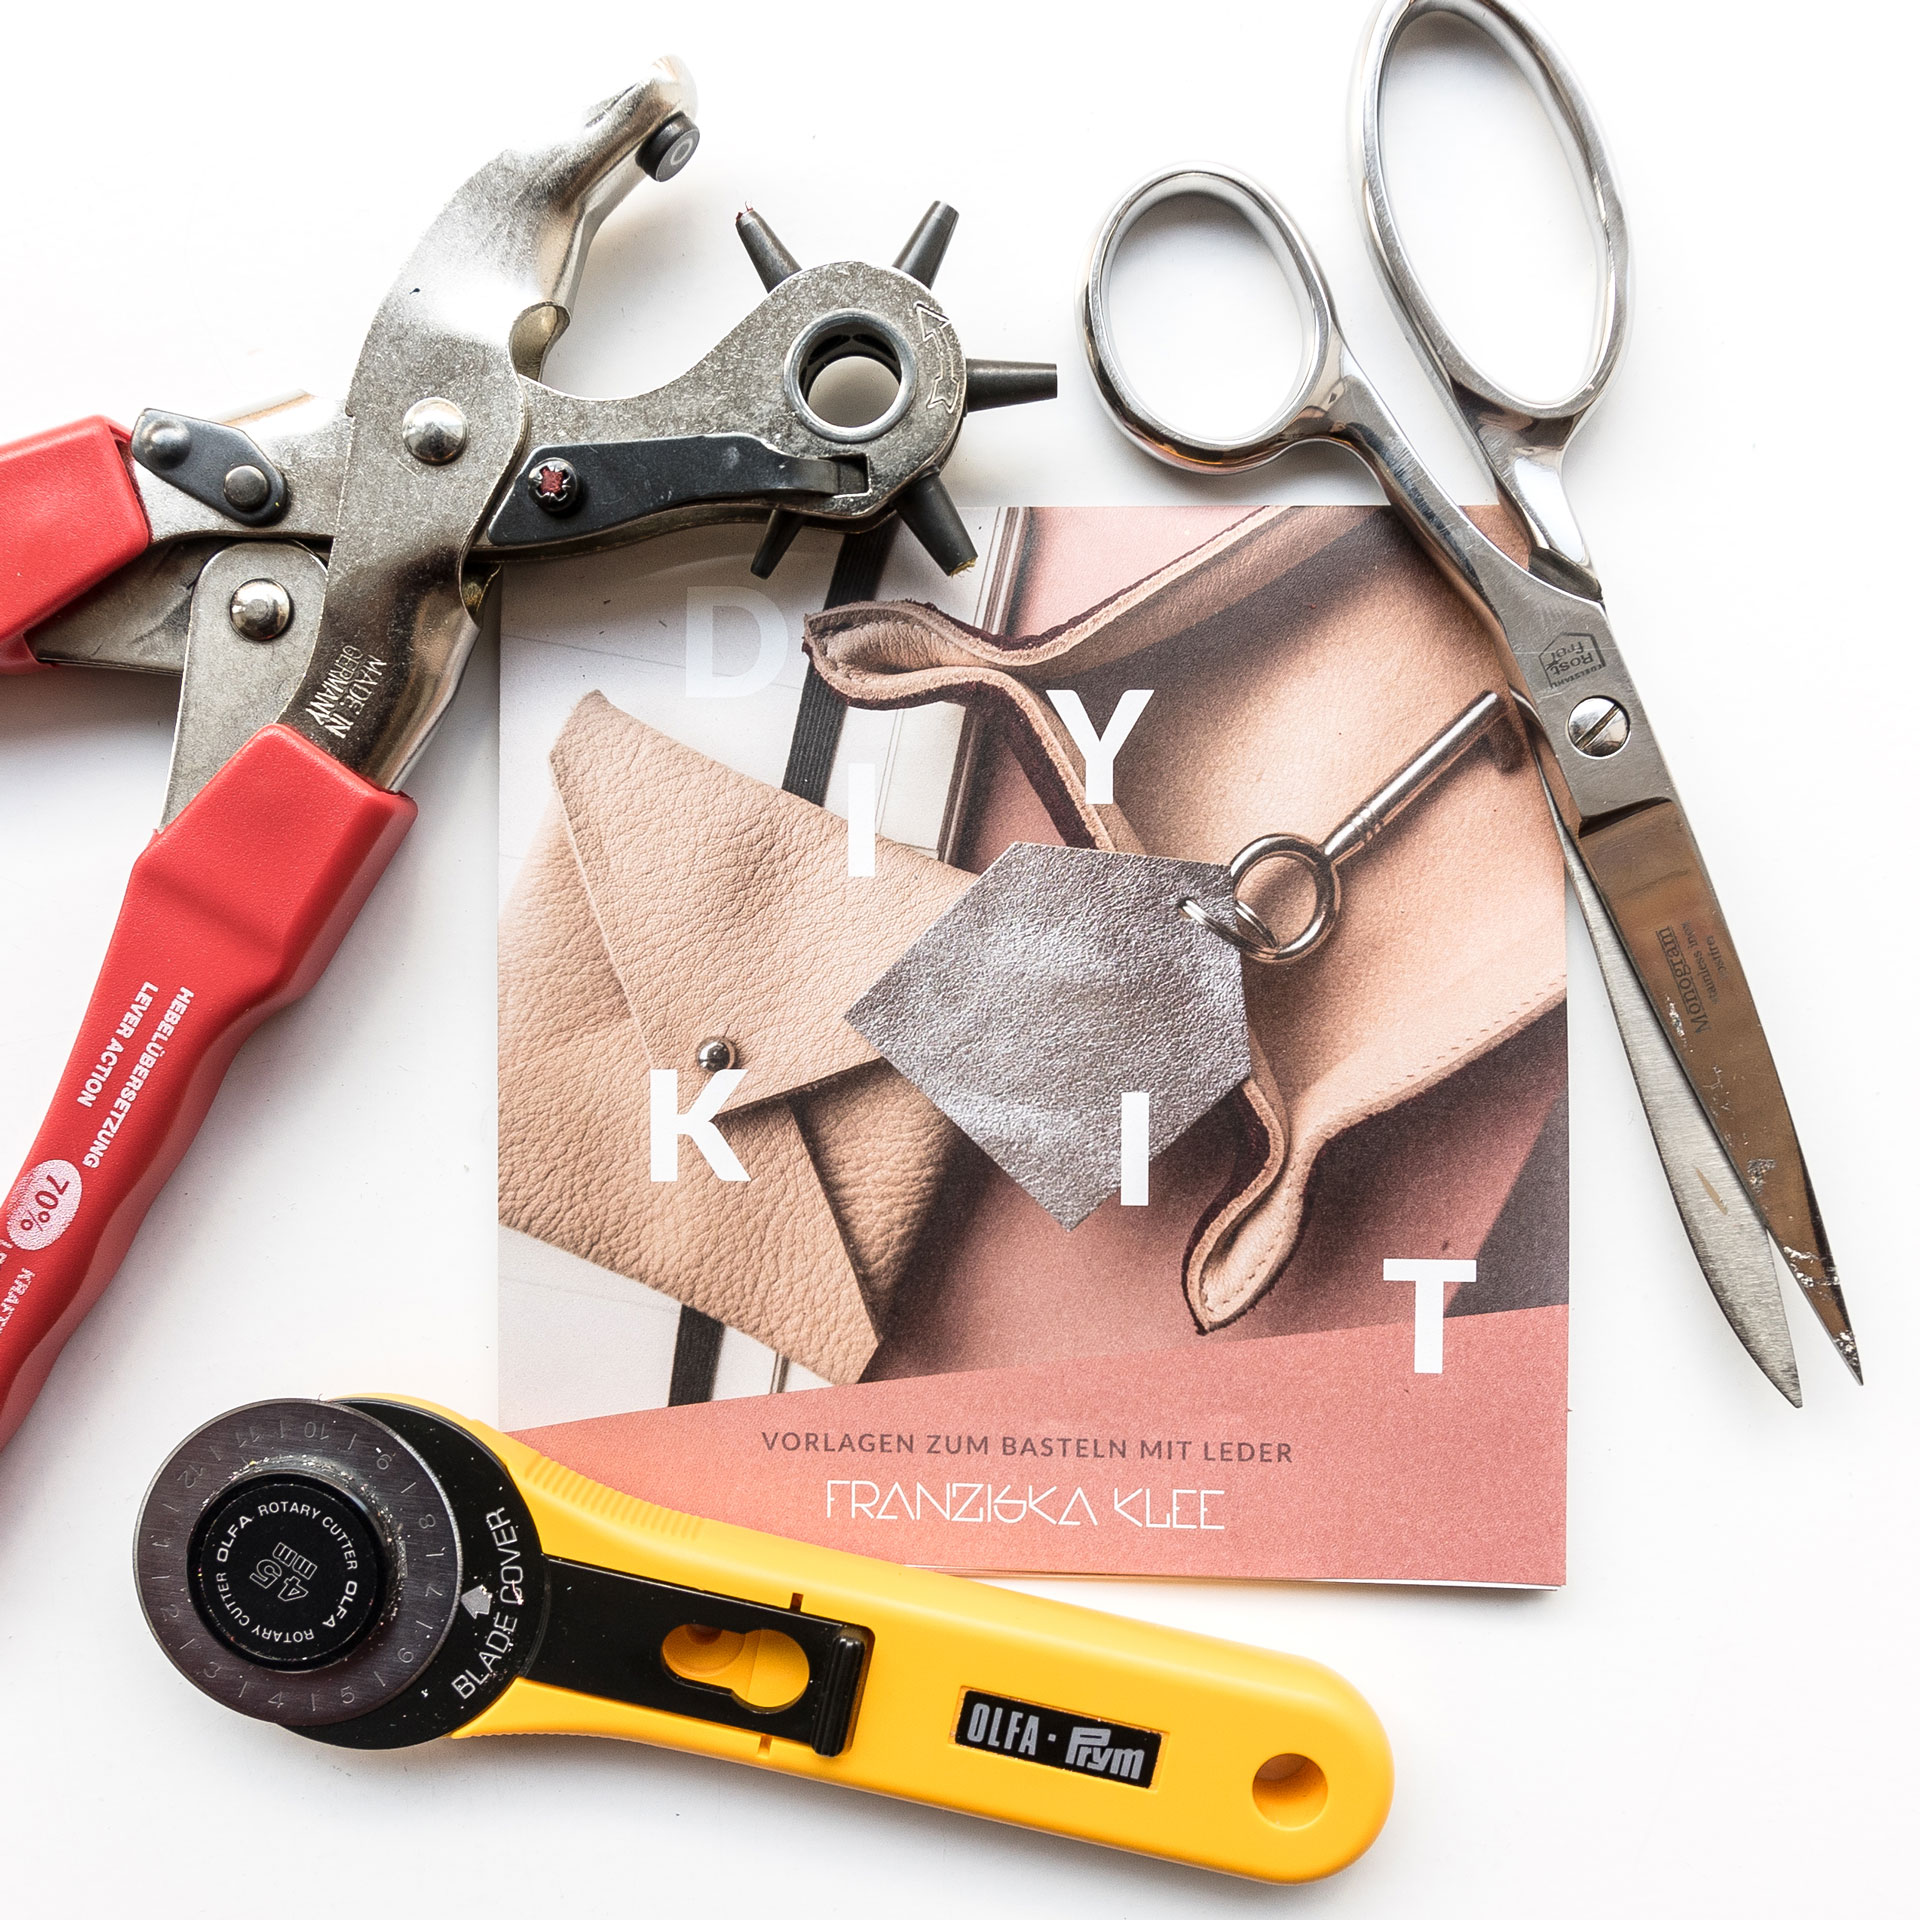 DIY craft sheet and useful accessories like scissors, hole punch and rotary cutter